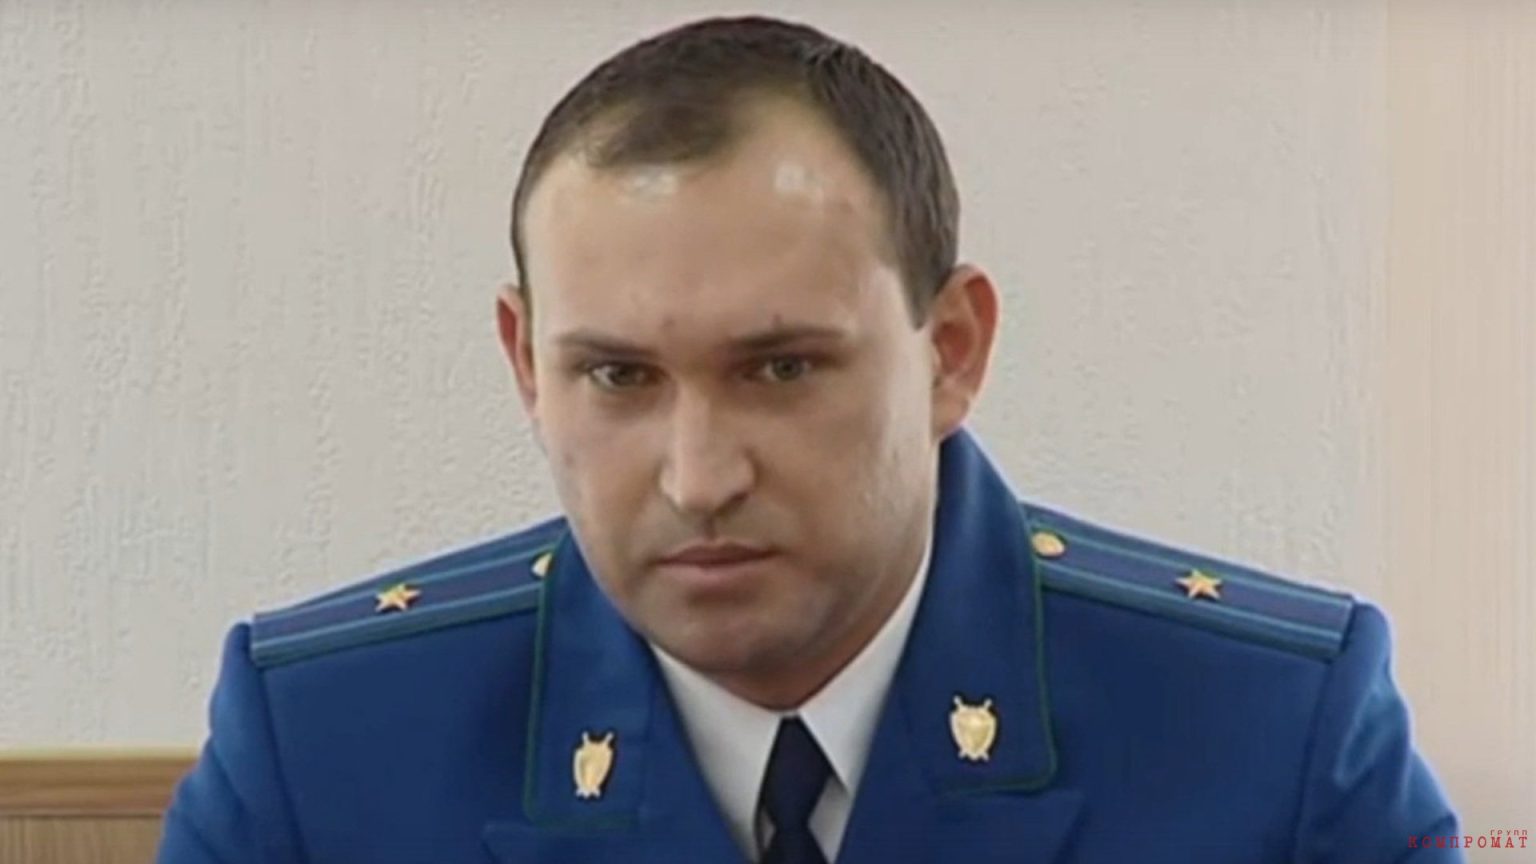 The Former Prosecutor Of Ramenskoye Was Given A 15-Year Strict Regime Prison Sentence And A 273 Million Ruble Fine For Taking Bribes, Engaging In Extortion, And Committing Fraud.